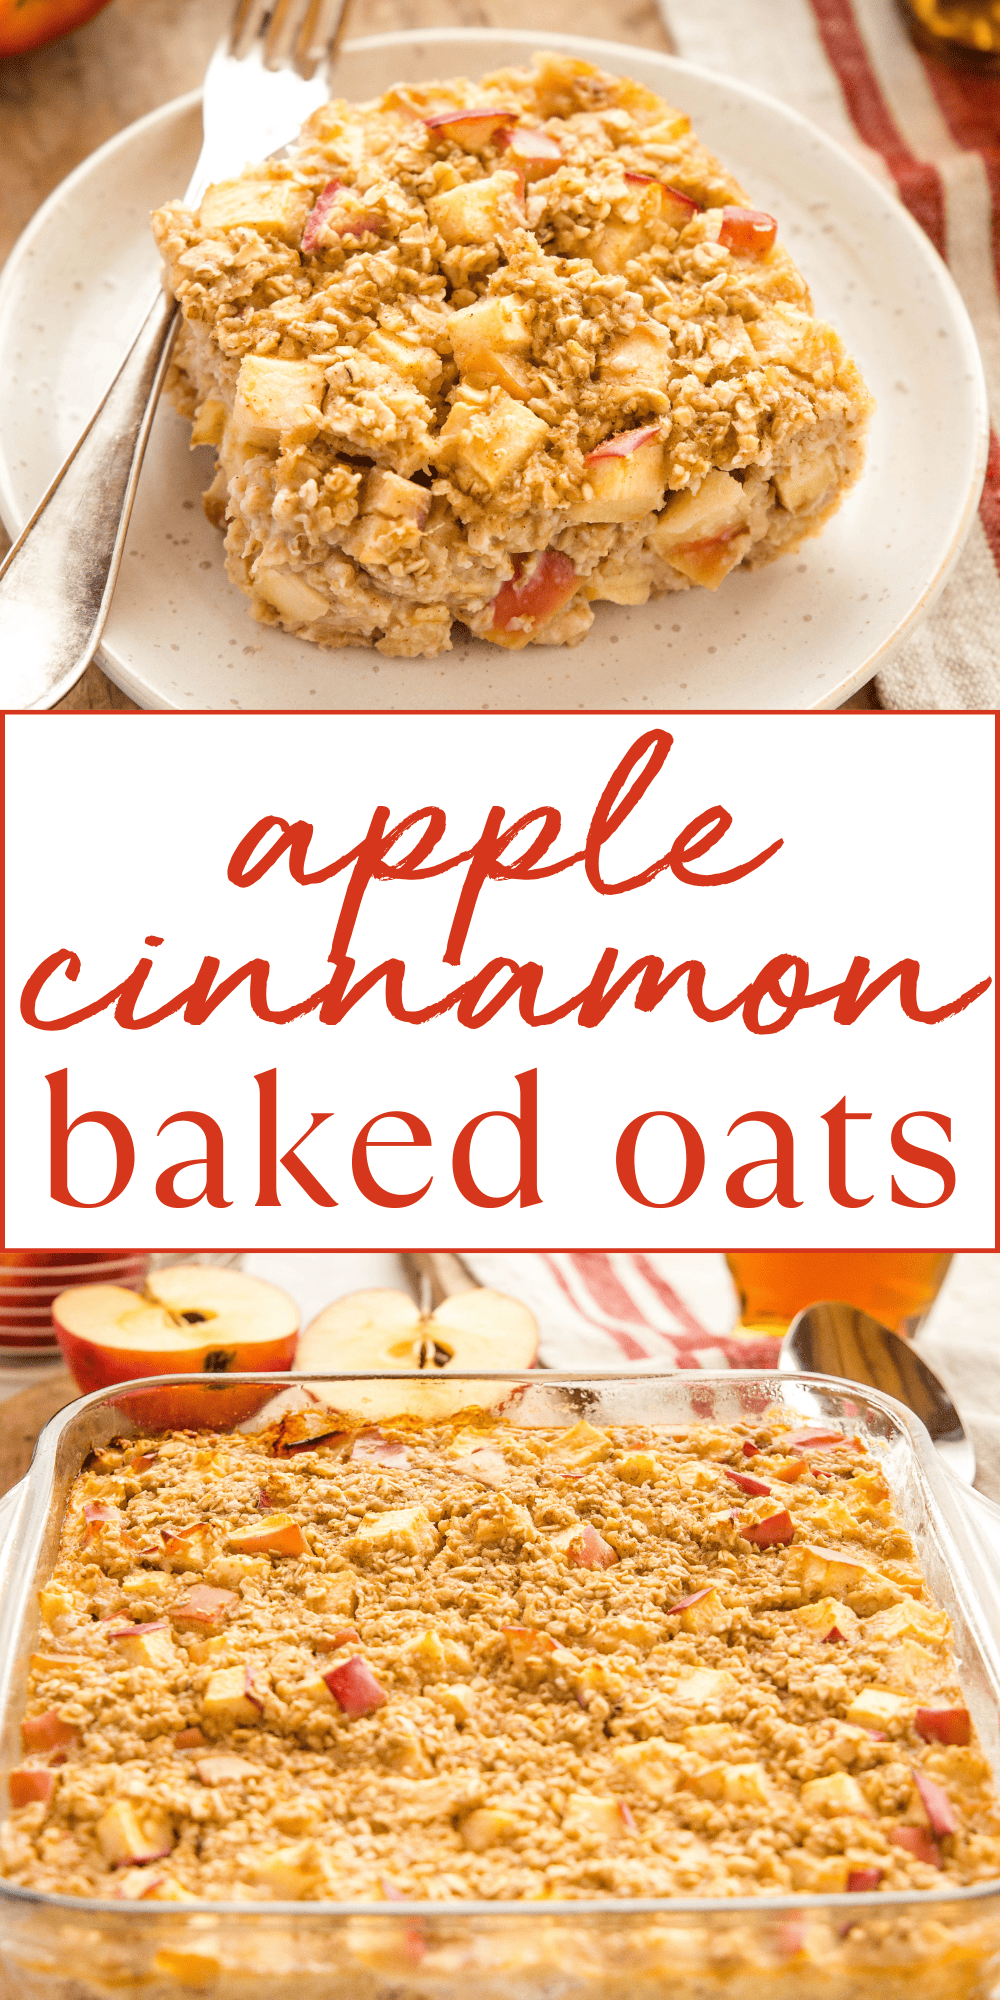 This Apple Cinnamon Baked Oatmeal recipe is made with whole grains, protein and sweetened with fruit. It's an easy healthy make-ahead breakfast with no added sugar! These baked oats are kid-friendly and perfect for serving with nut butter, maple syrup or your favourite toppings! Recipe from thebusybaker.ca! #applecinnamonbakedoatmeal #bakedoatmeal #bakedoats #easybreakfast #healthy #health #healthybreakfast via @busybakerblog